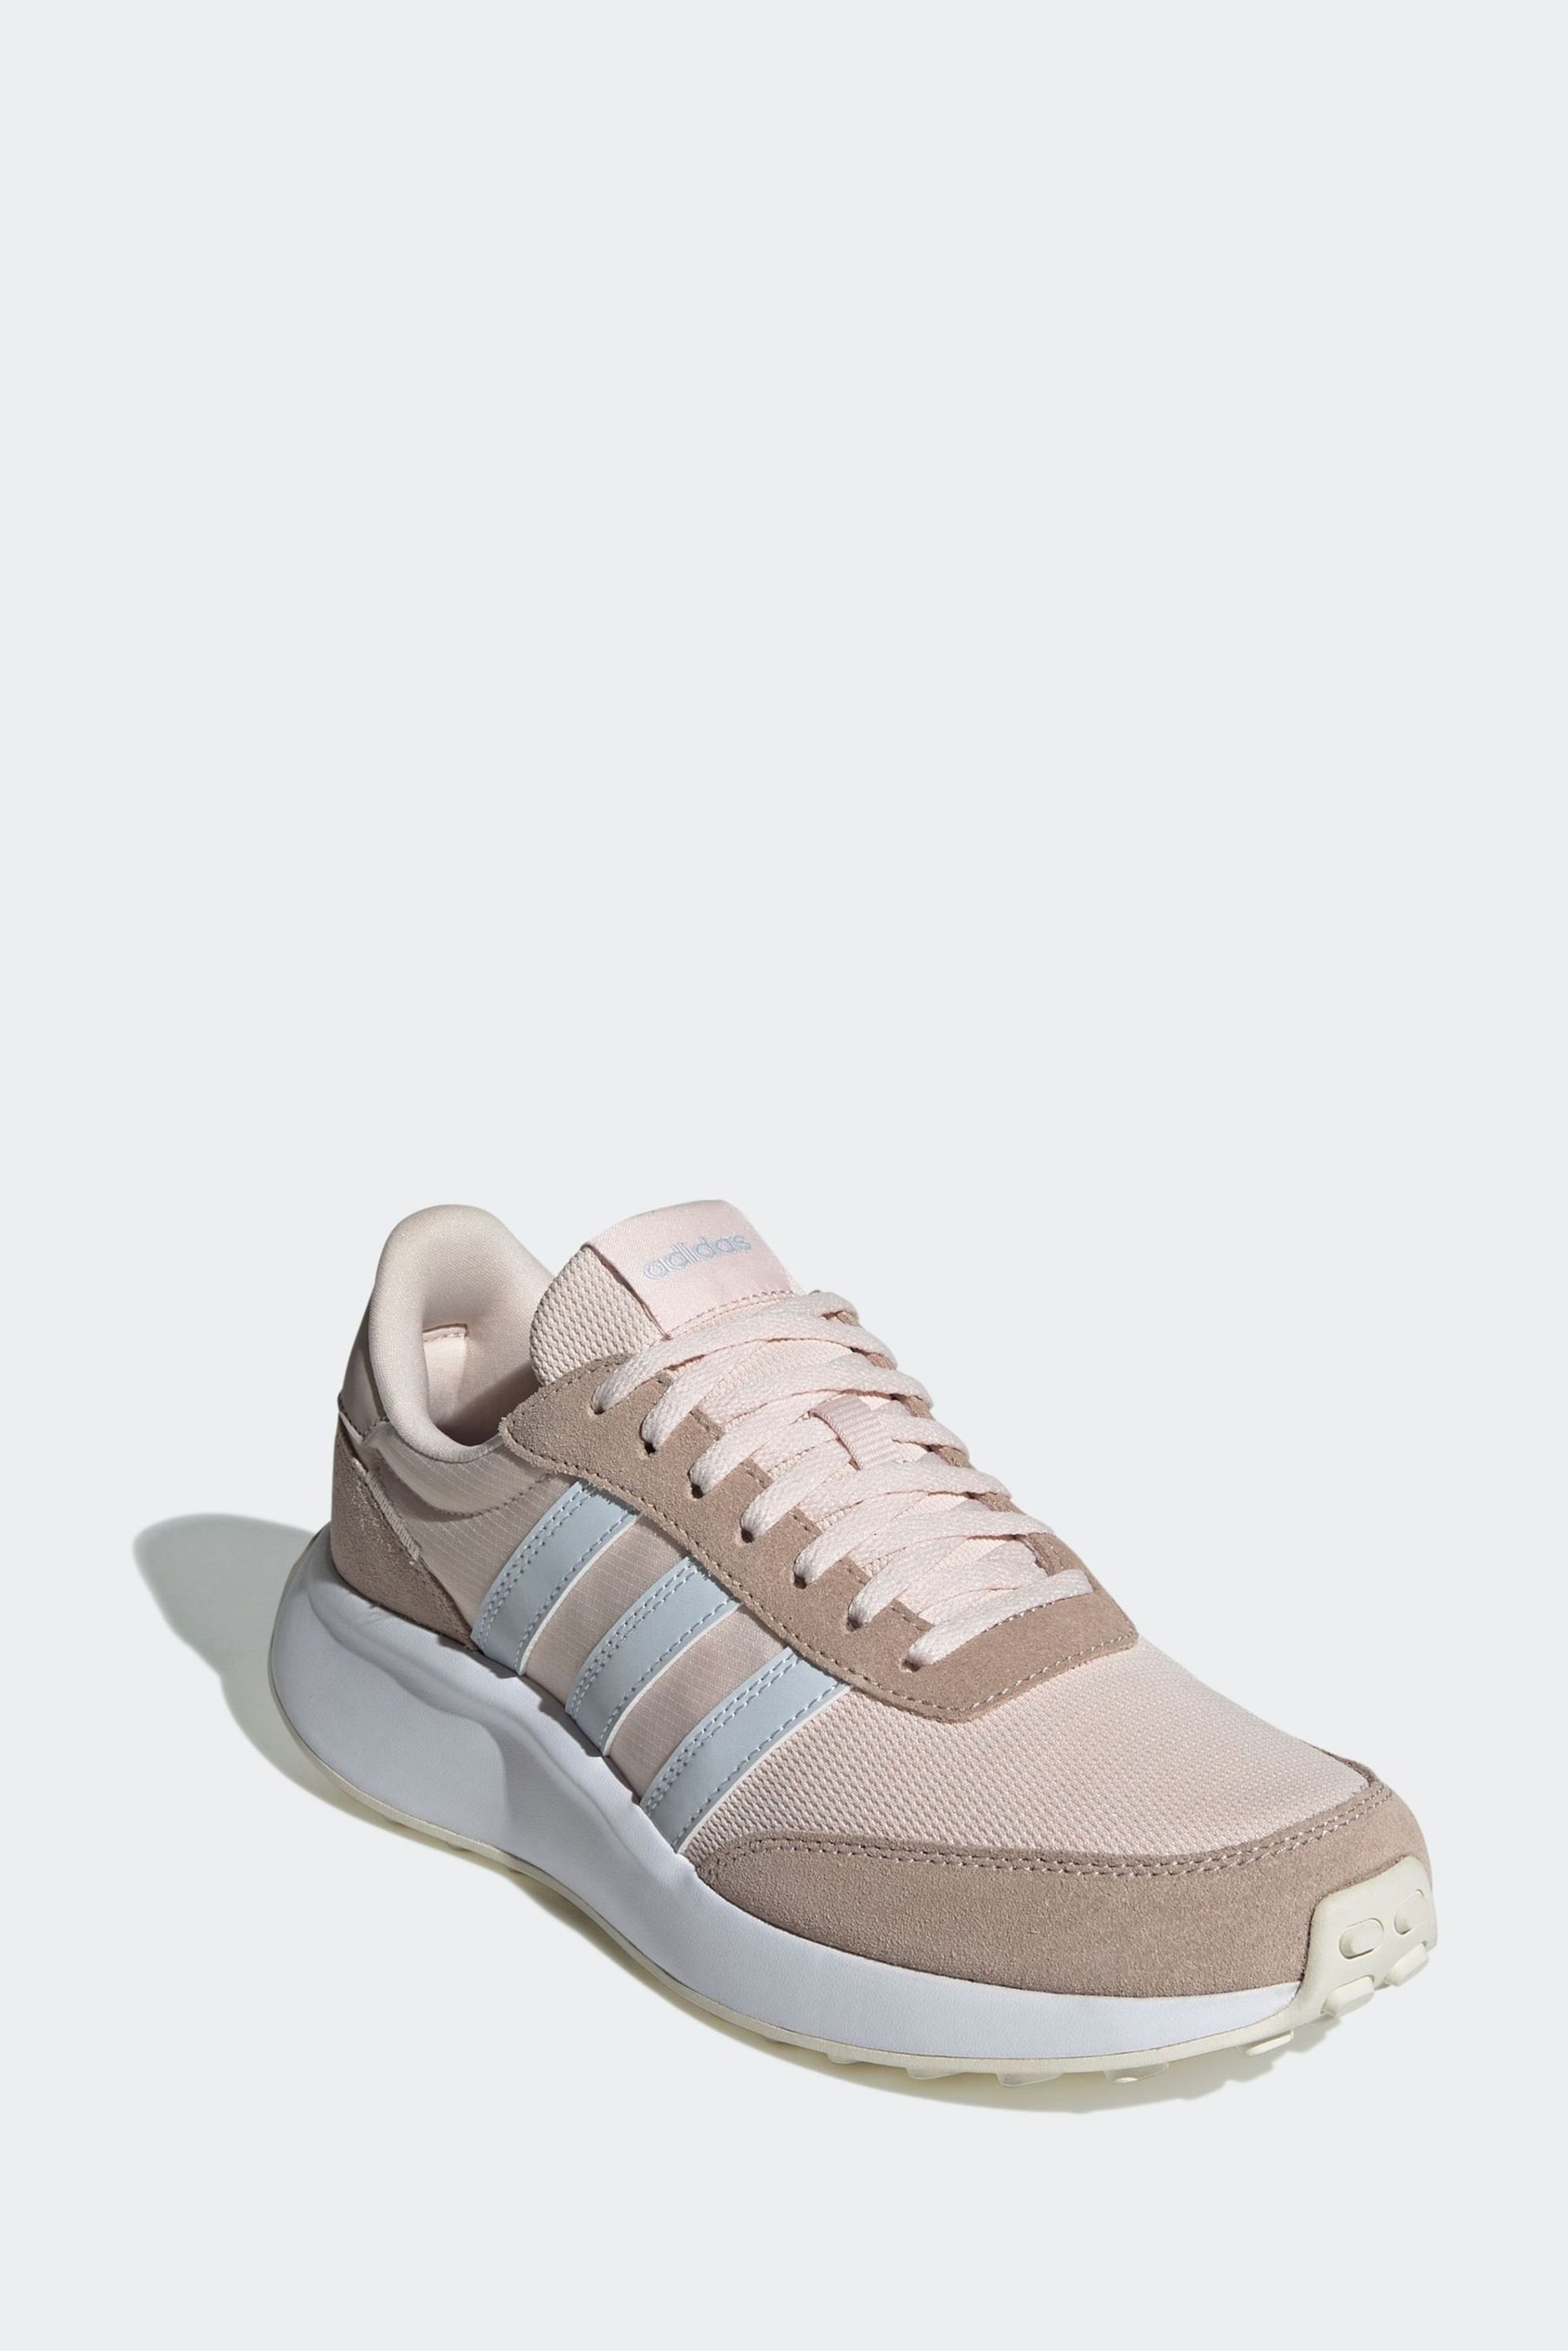 adidas Pink Run 70s Trainers - Image 4 of 9